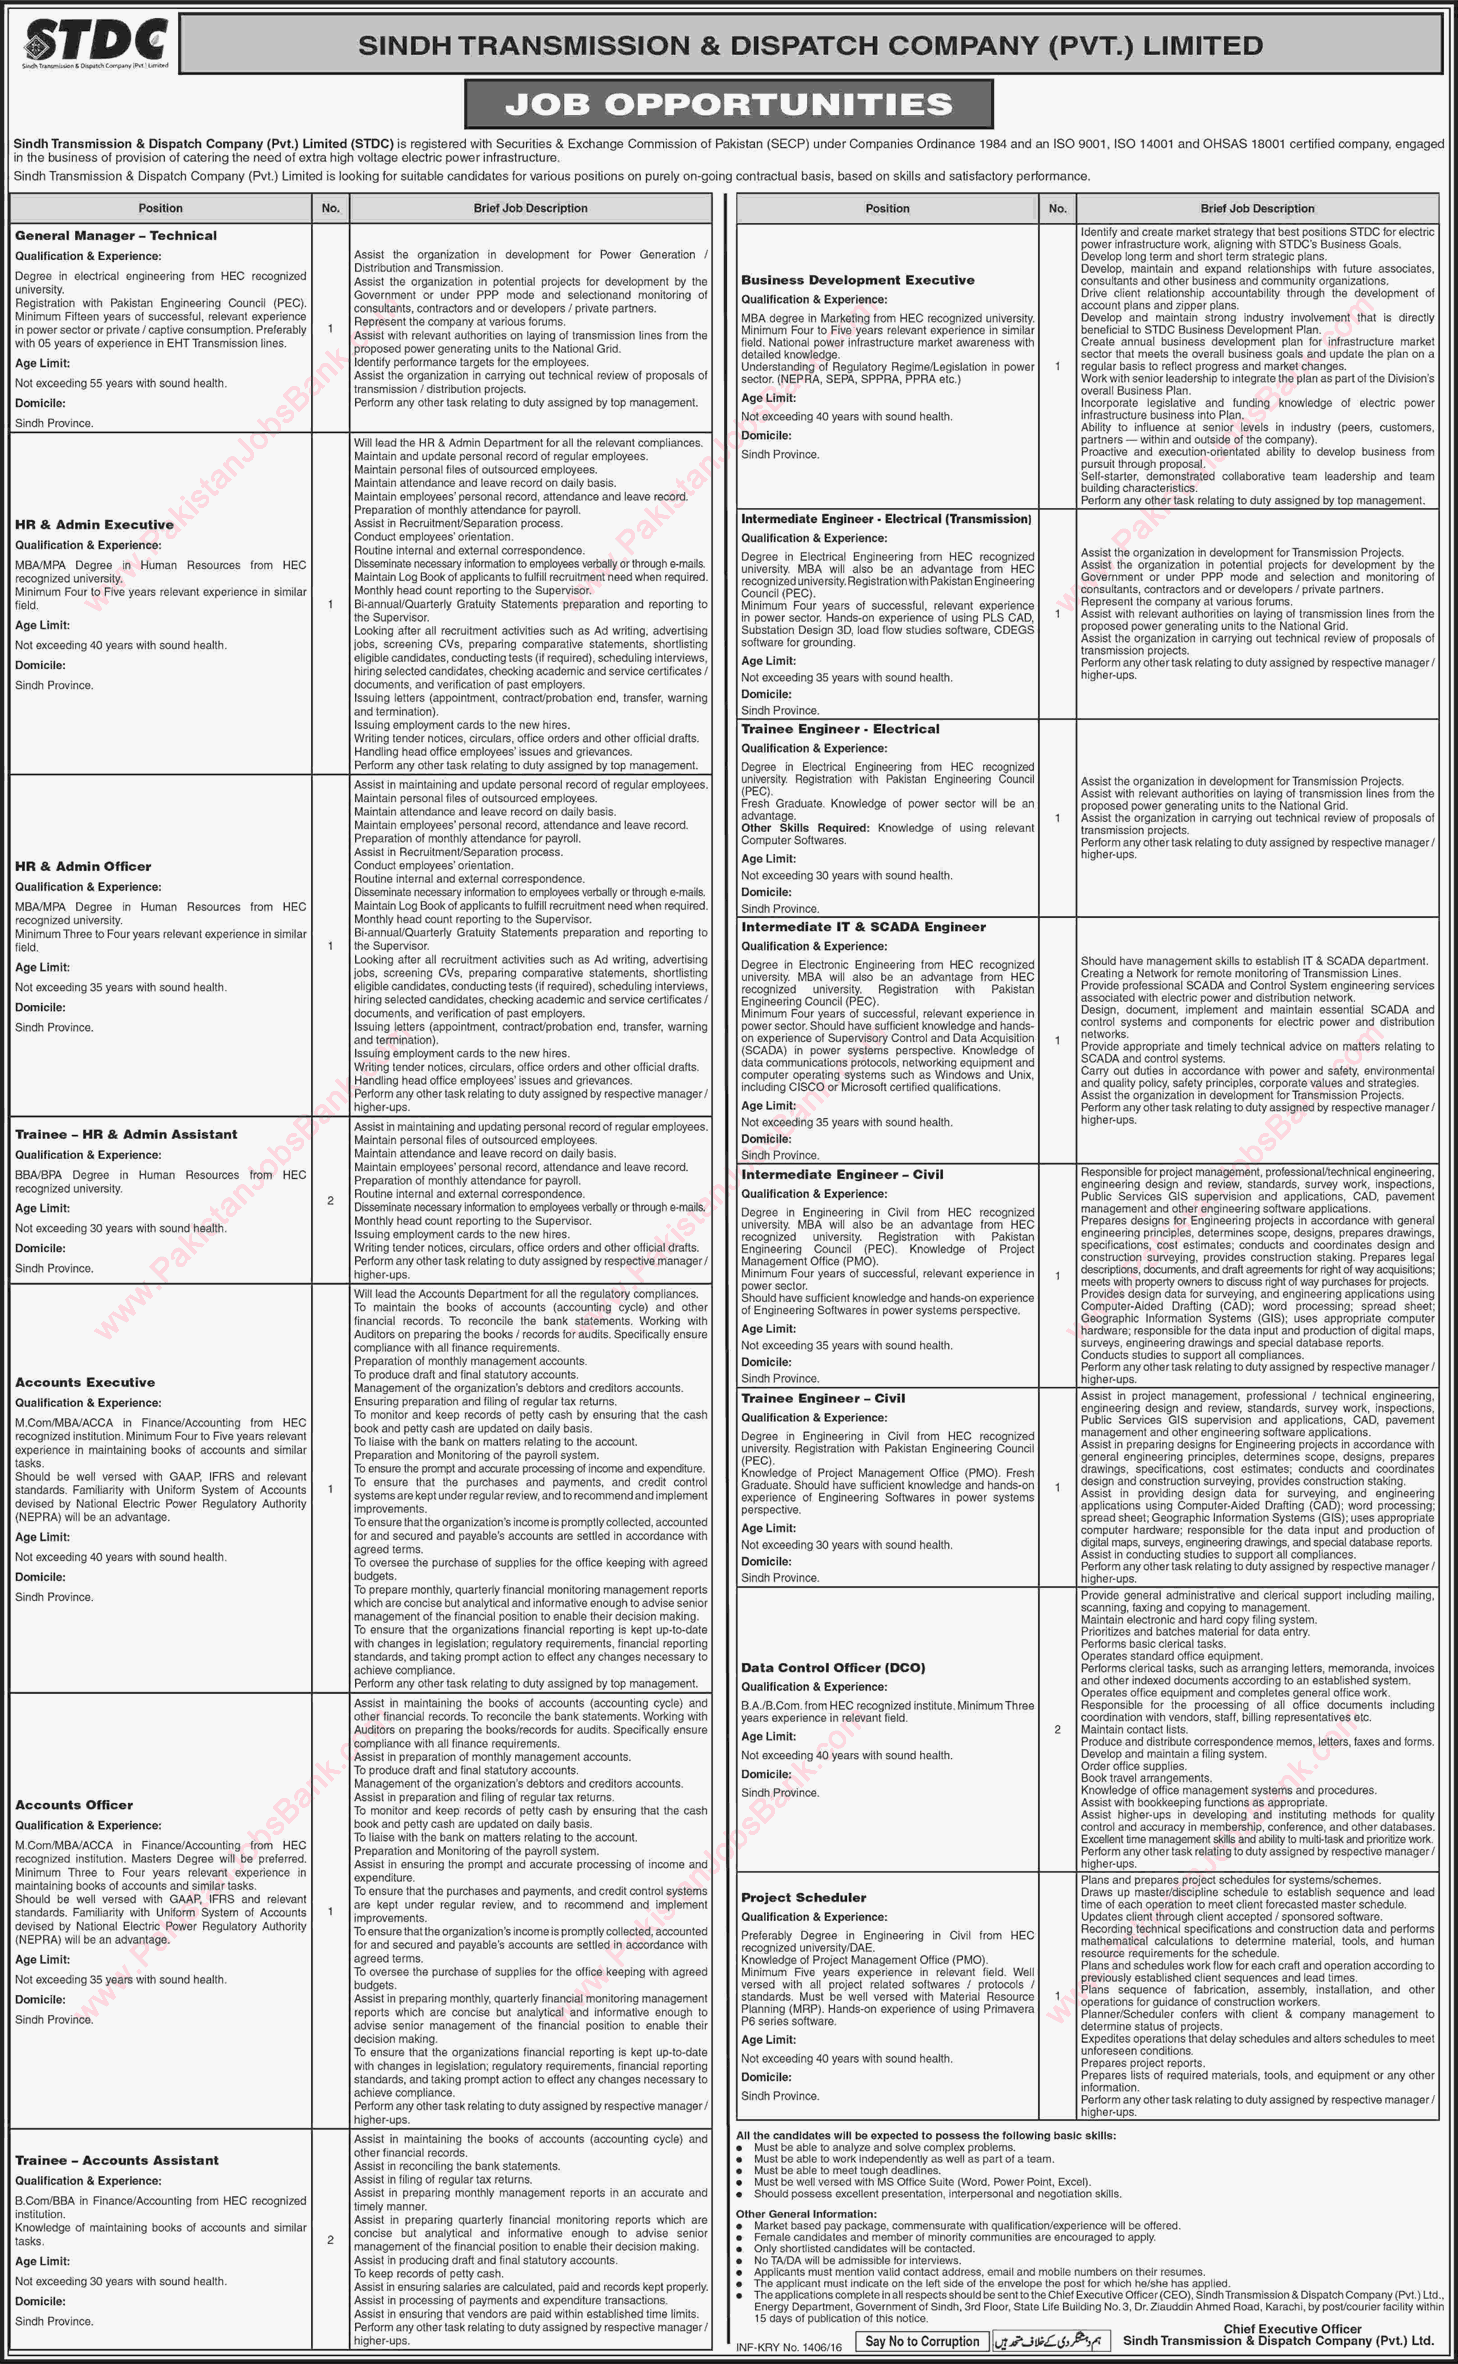 Sindh Transmission and Dispatch Company Jobs 2016 April WAPDA STDC Trainee Engineers, HR / Admin Officers & Others Latest